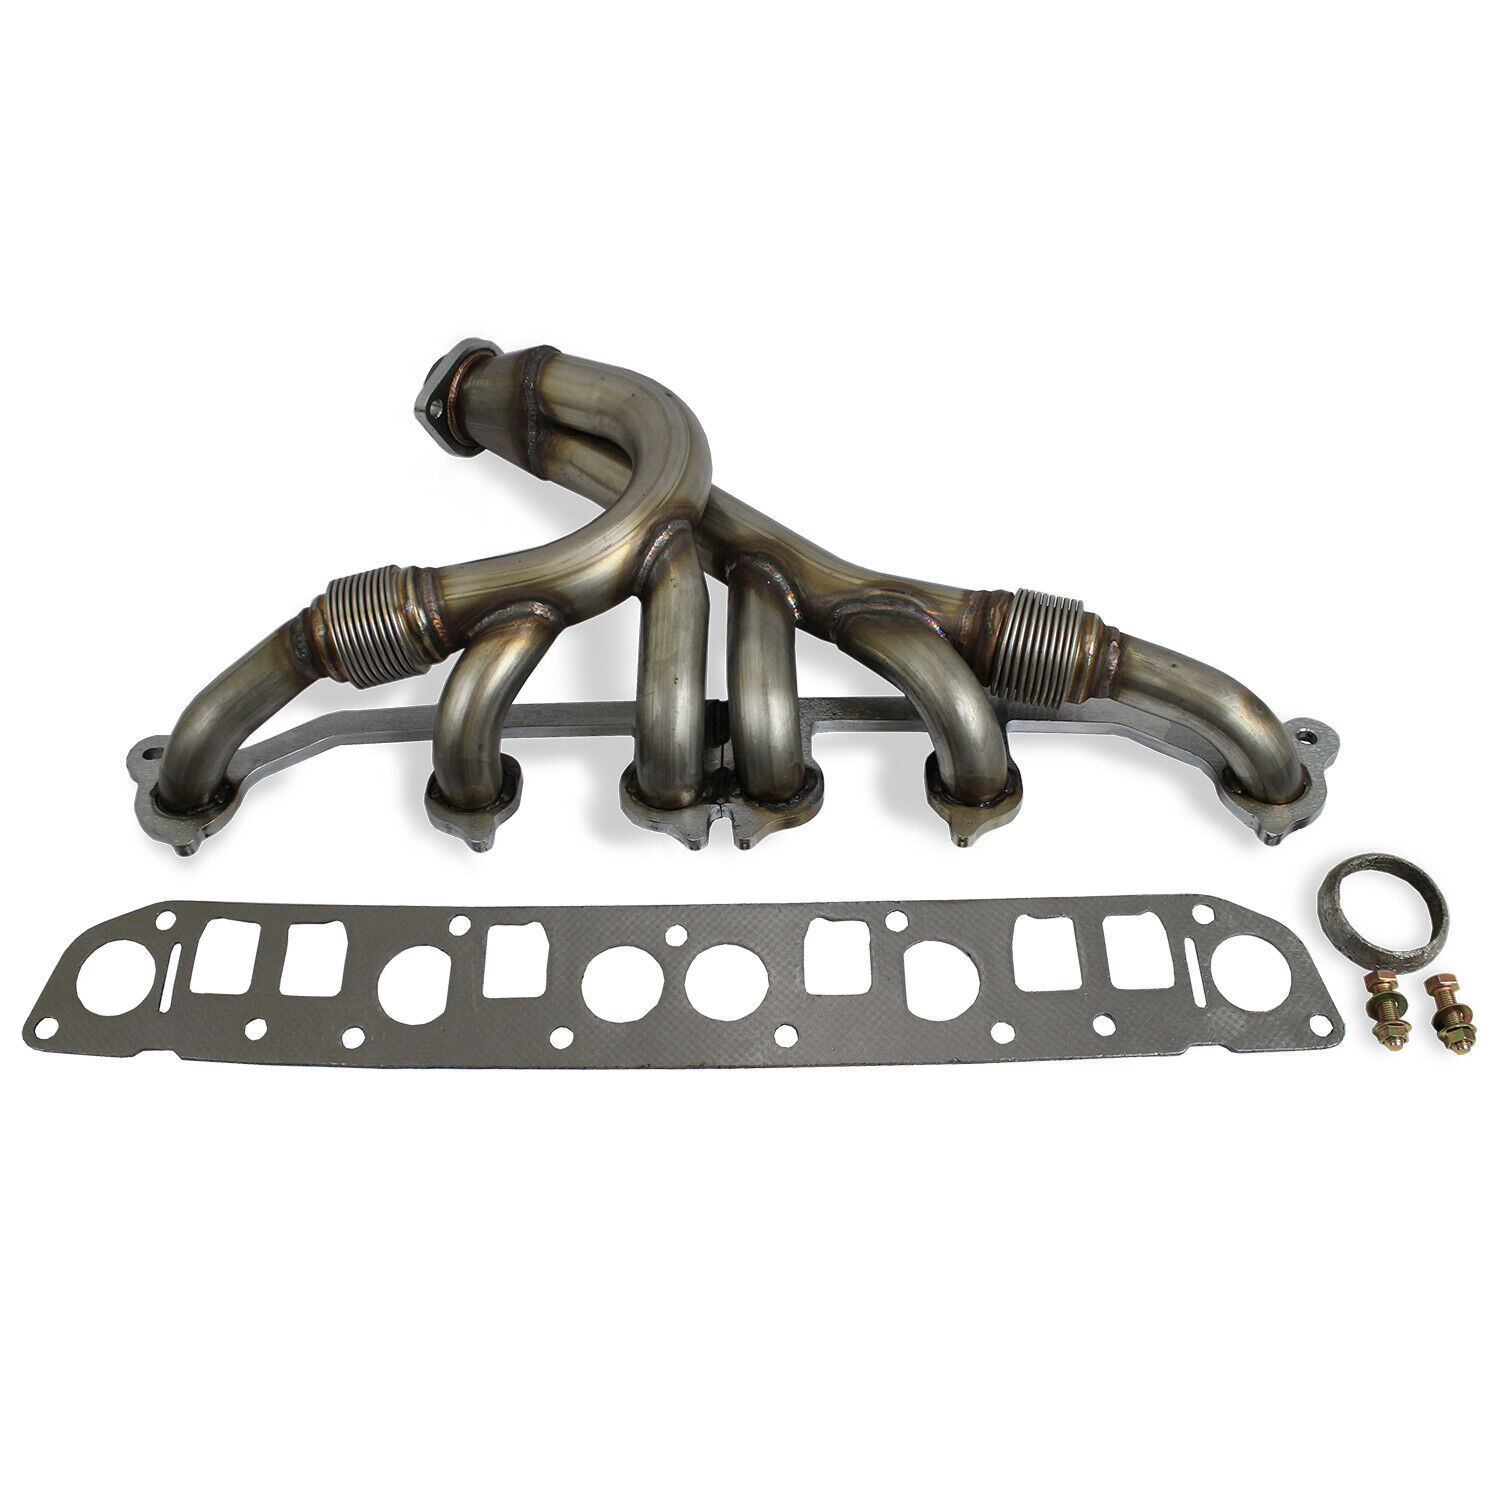 Stainless Steel Manifold Header For 91-99 Jeep Wrangler Exhaust Cherokee 4.0L TJ